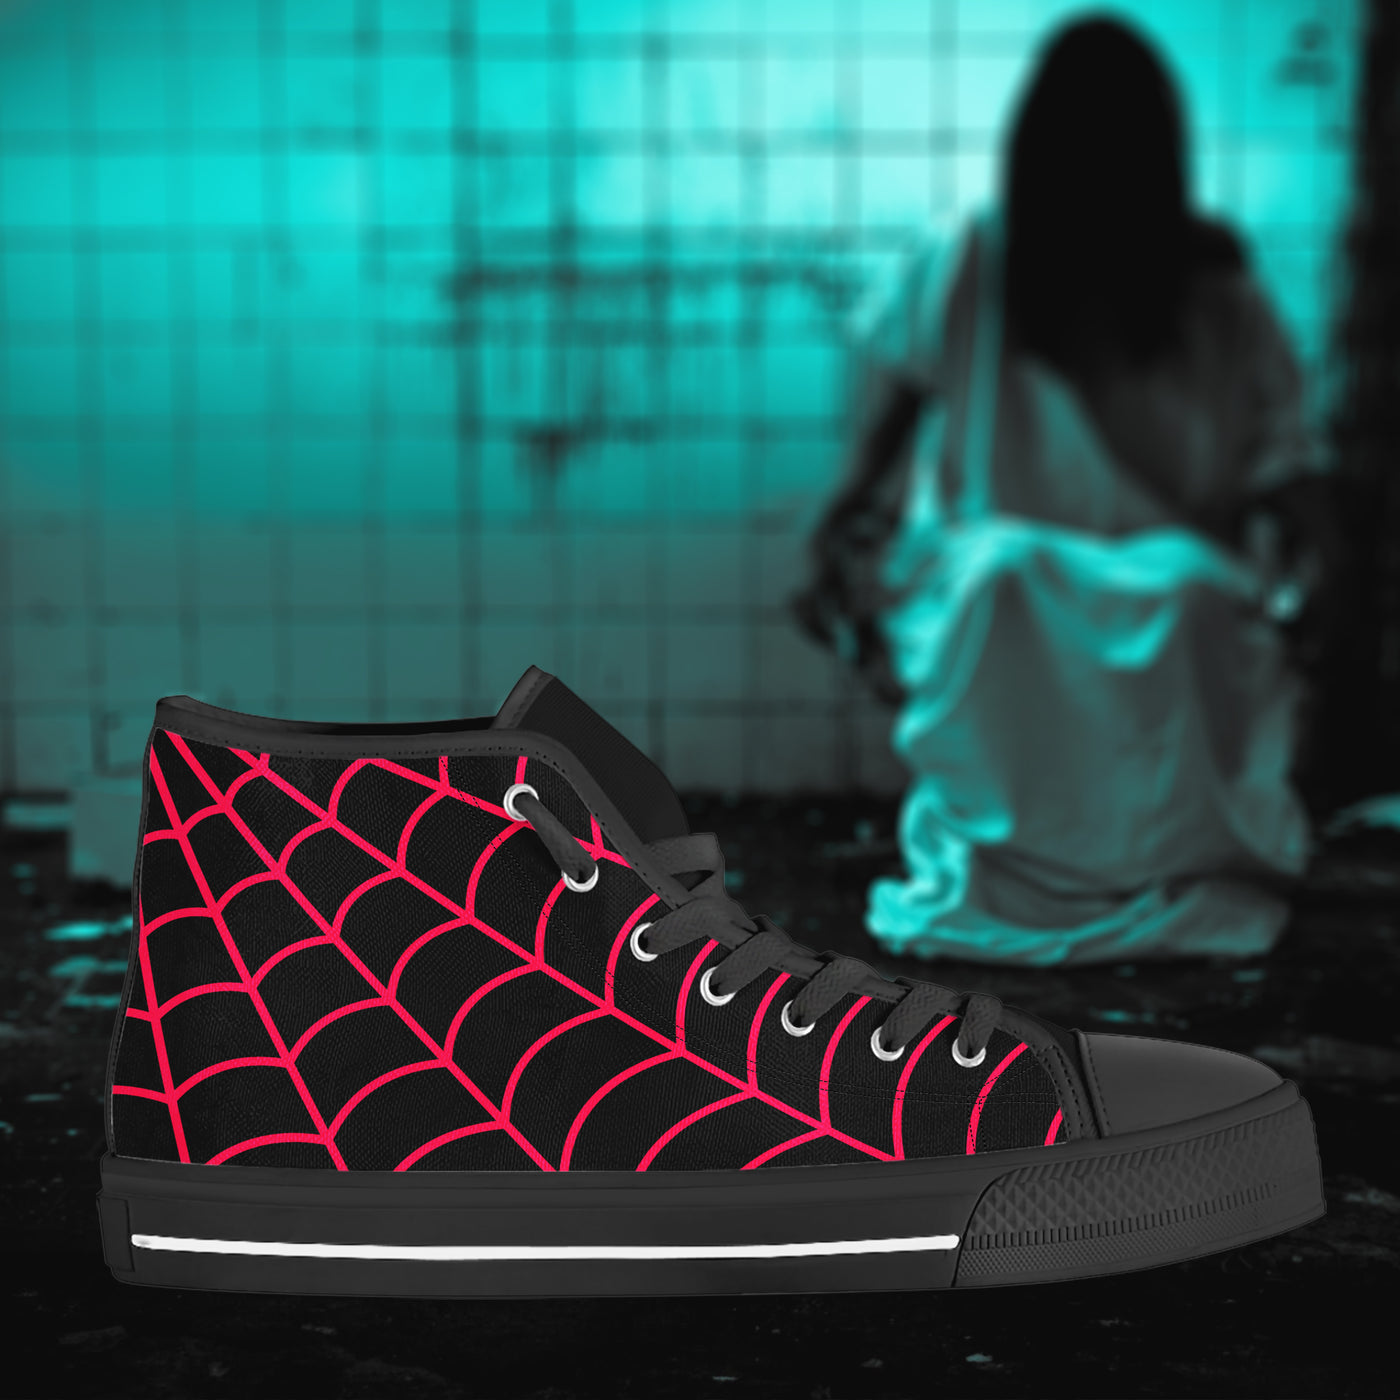 Dark Slate Gray Neon Pink Spiderweb | Women's Classic High Top Canvas Shoes